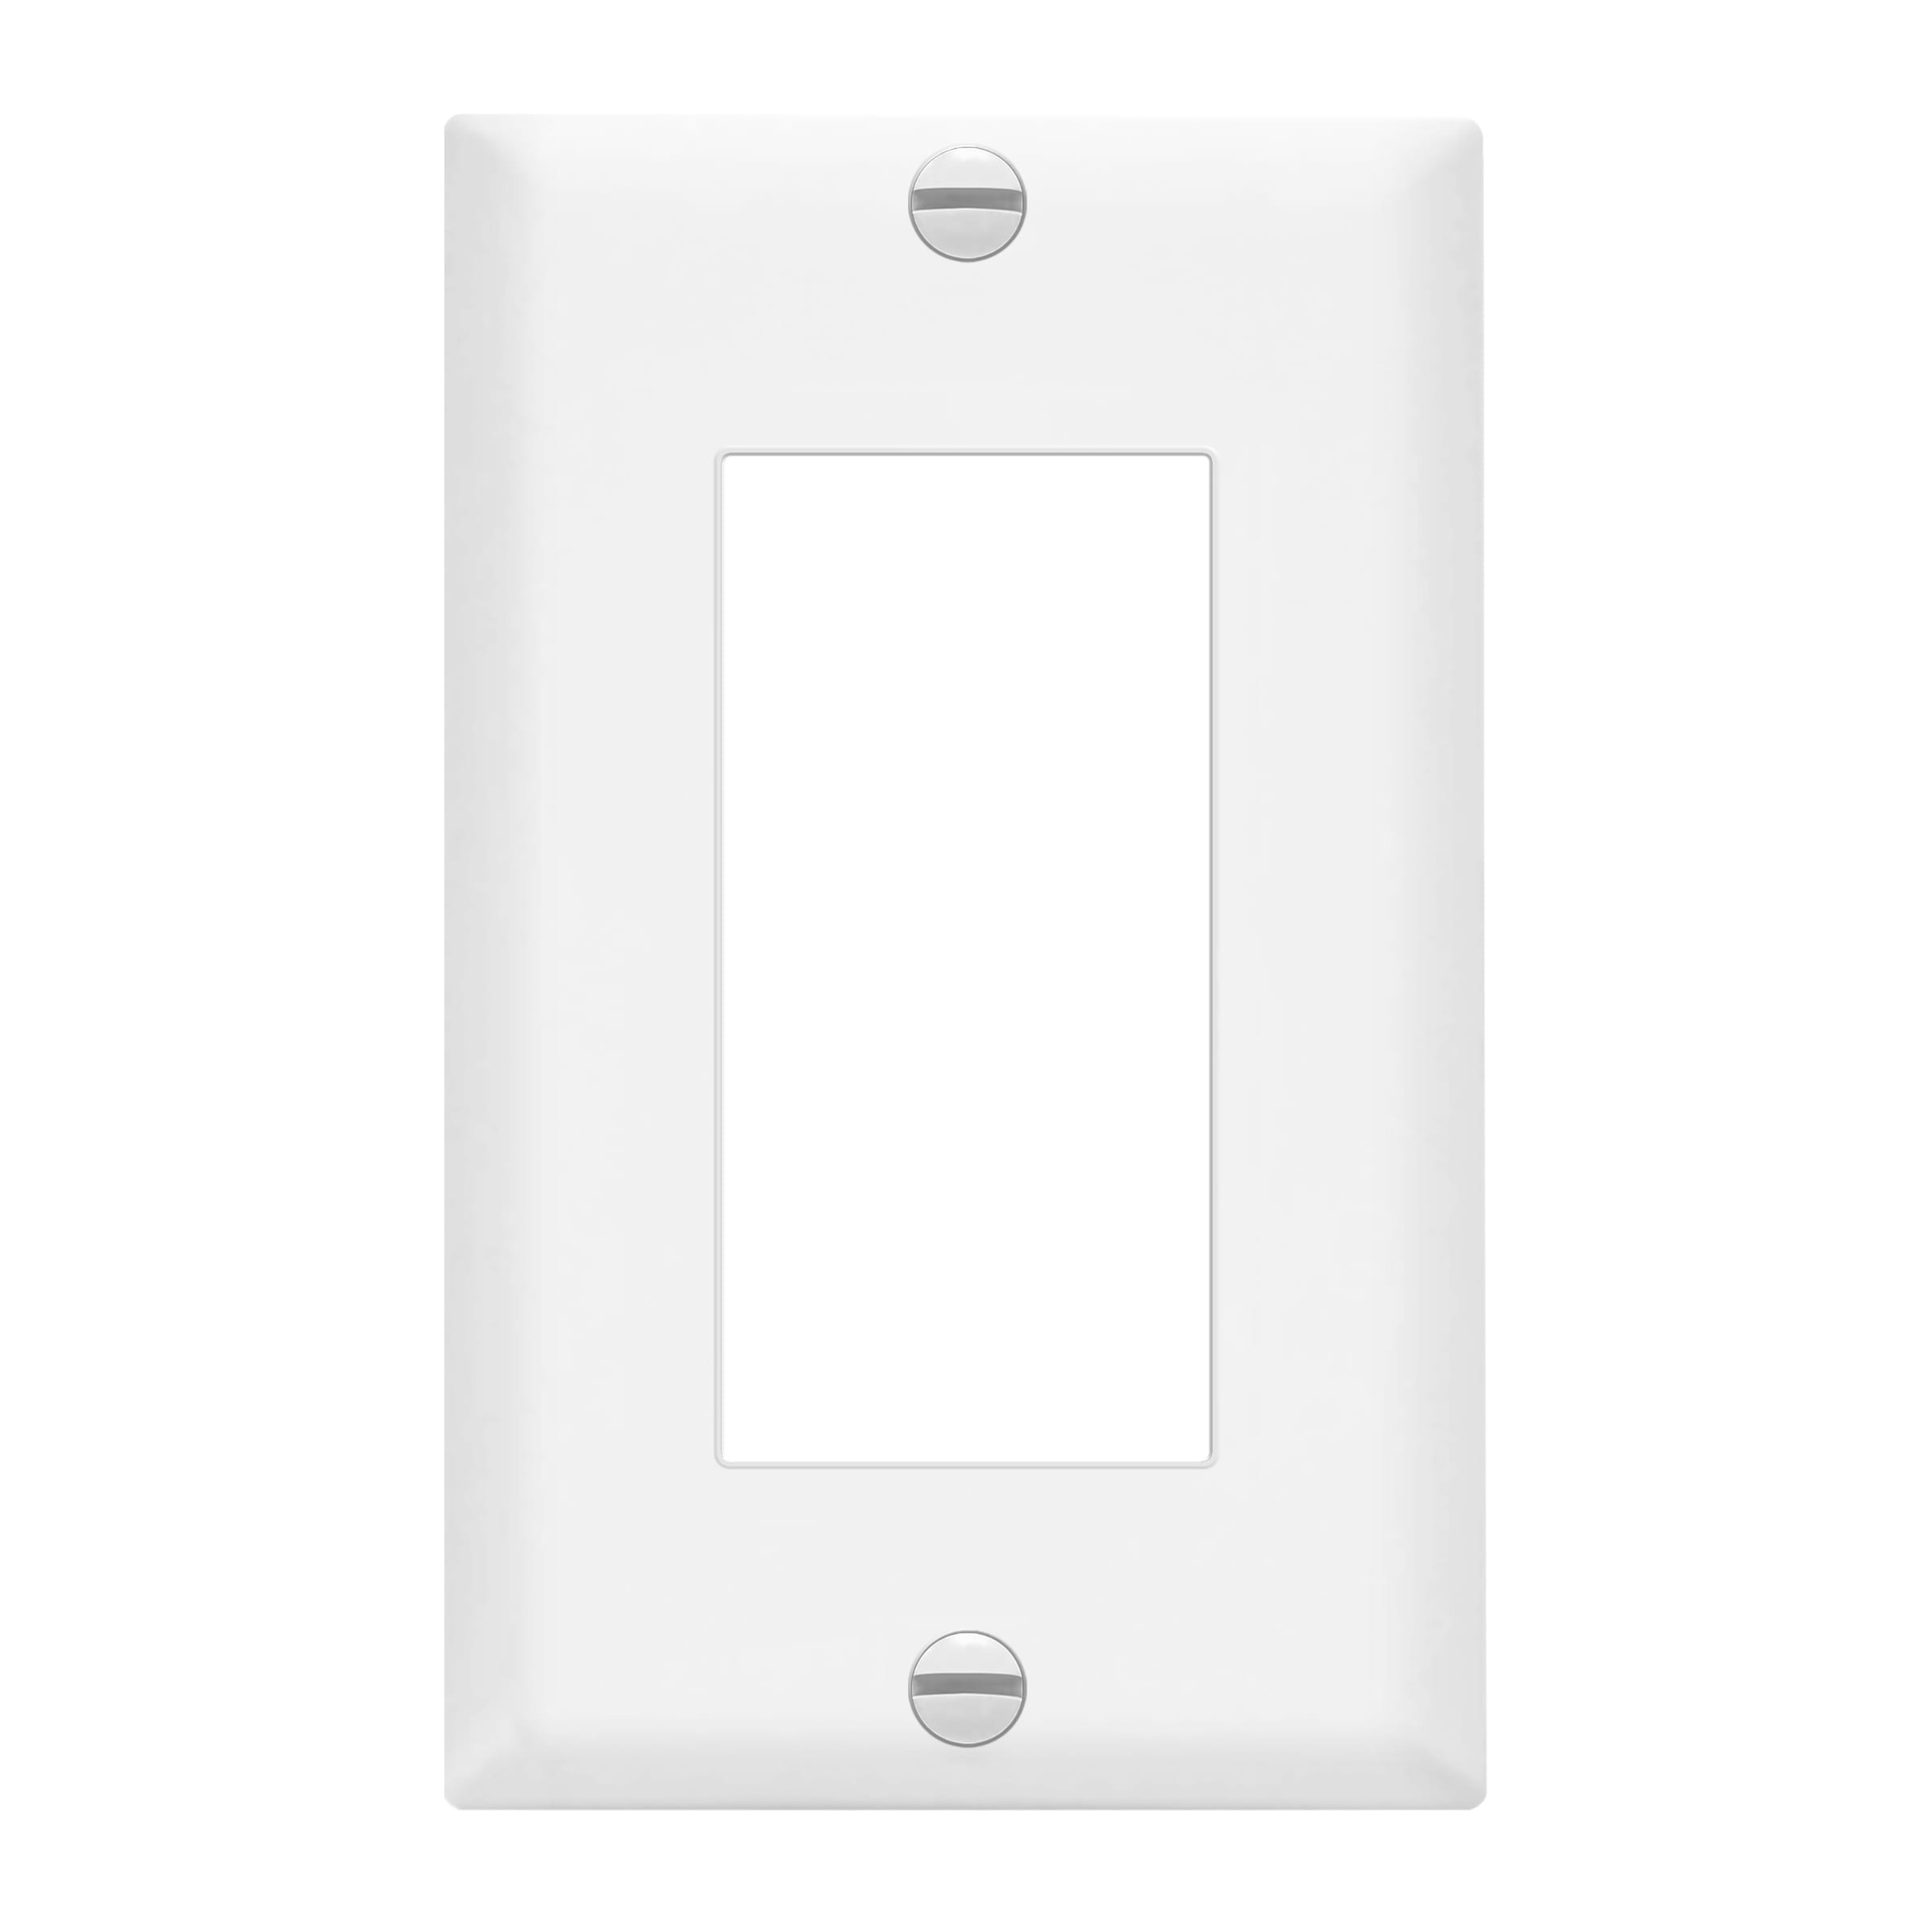 1-Gang Decorator/GFCI Outlet Wall Plate